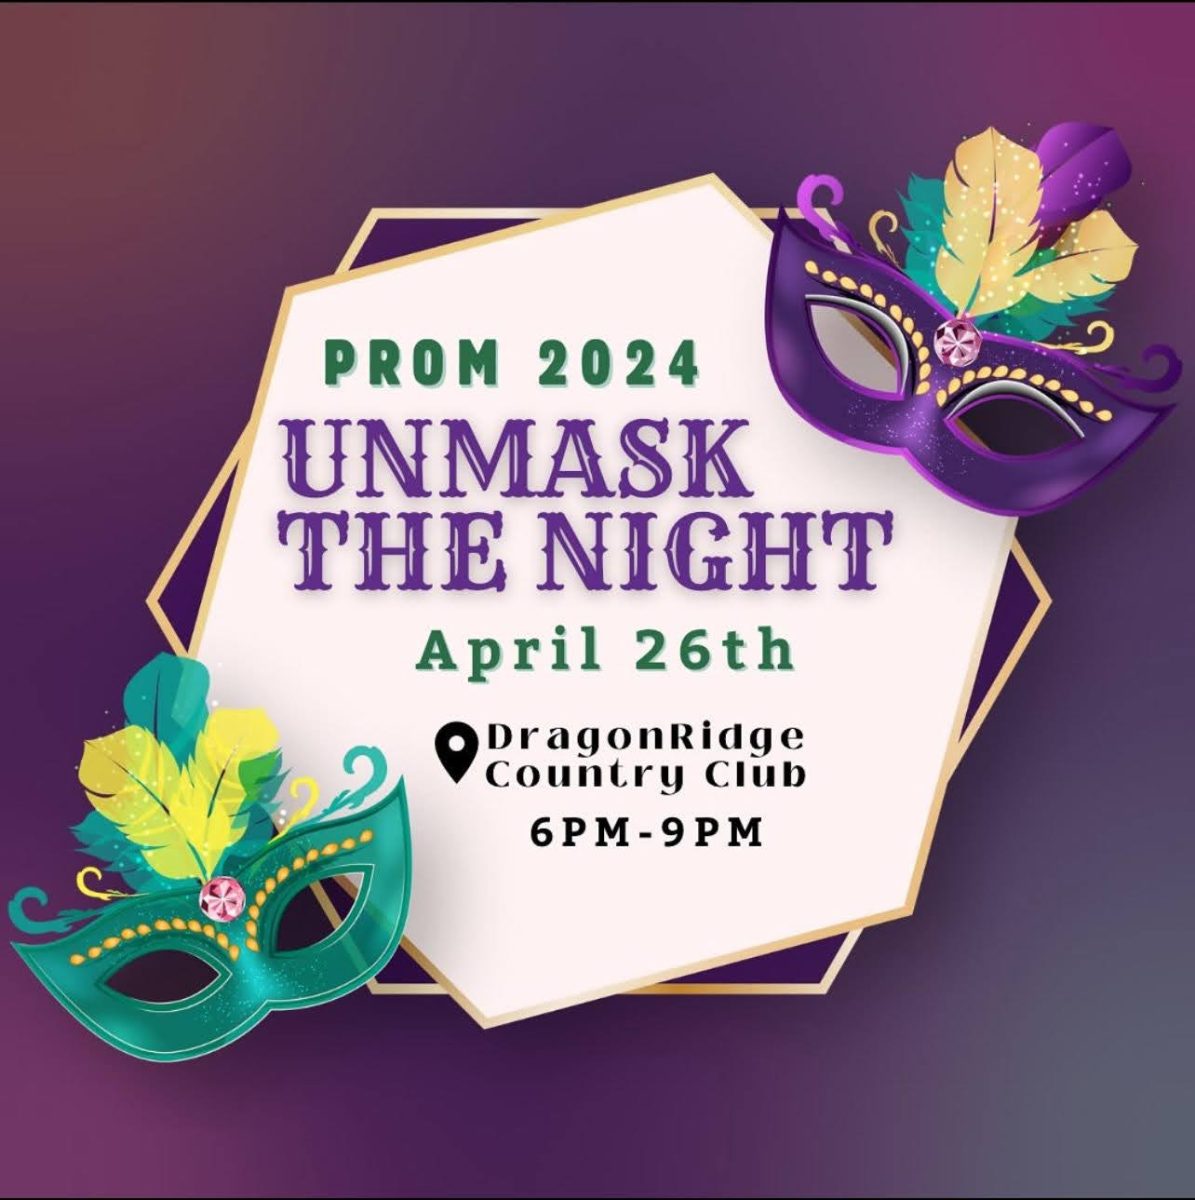 Behind Unmask the Night Prom!